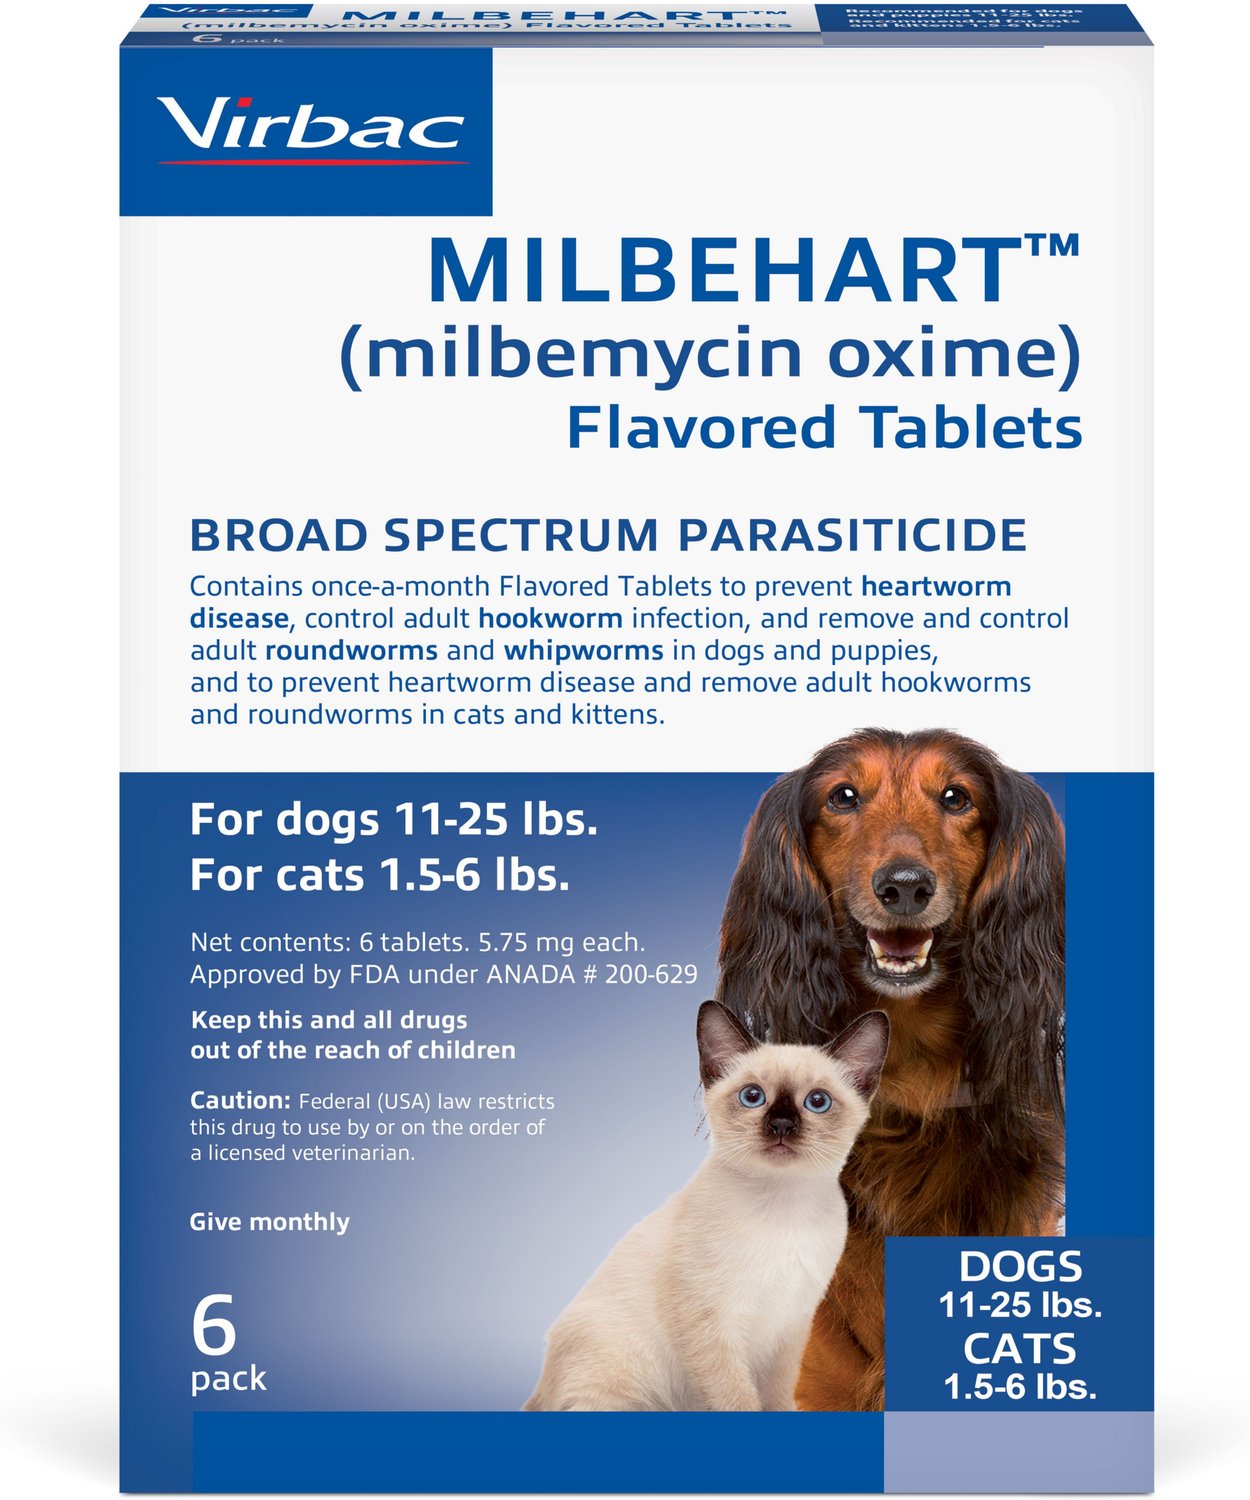 milbehart-flavored-tablets-for-dogs-11-25-lbs-cats-1-5-6-lbs